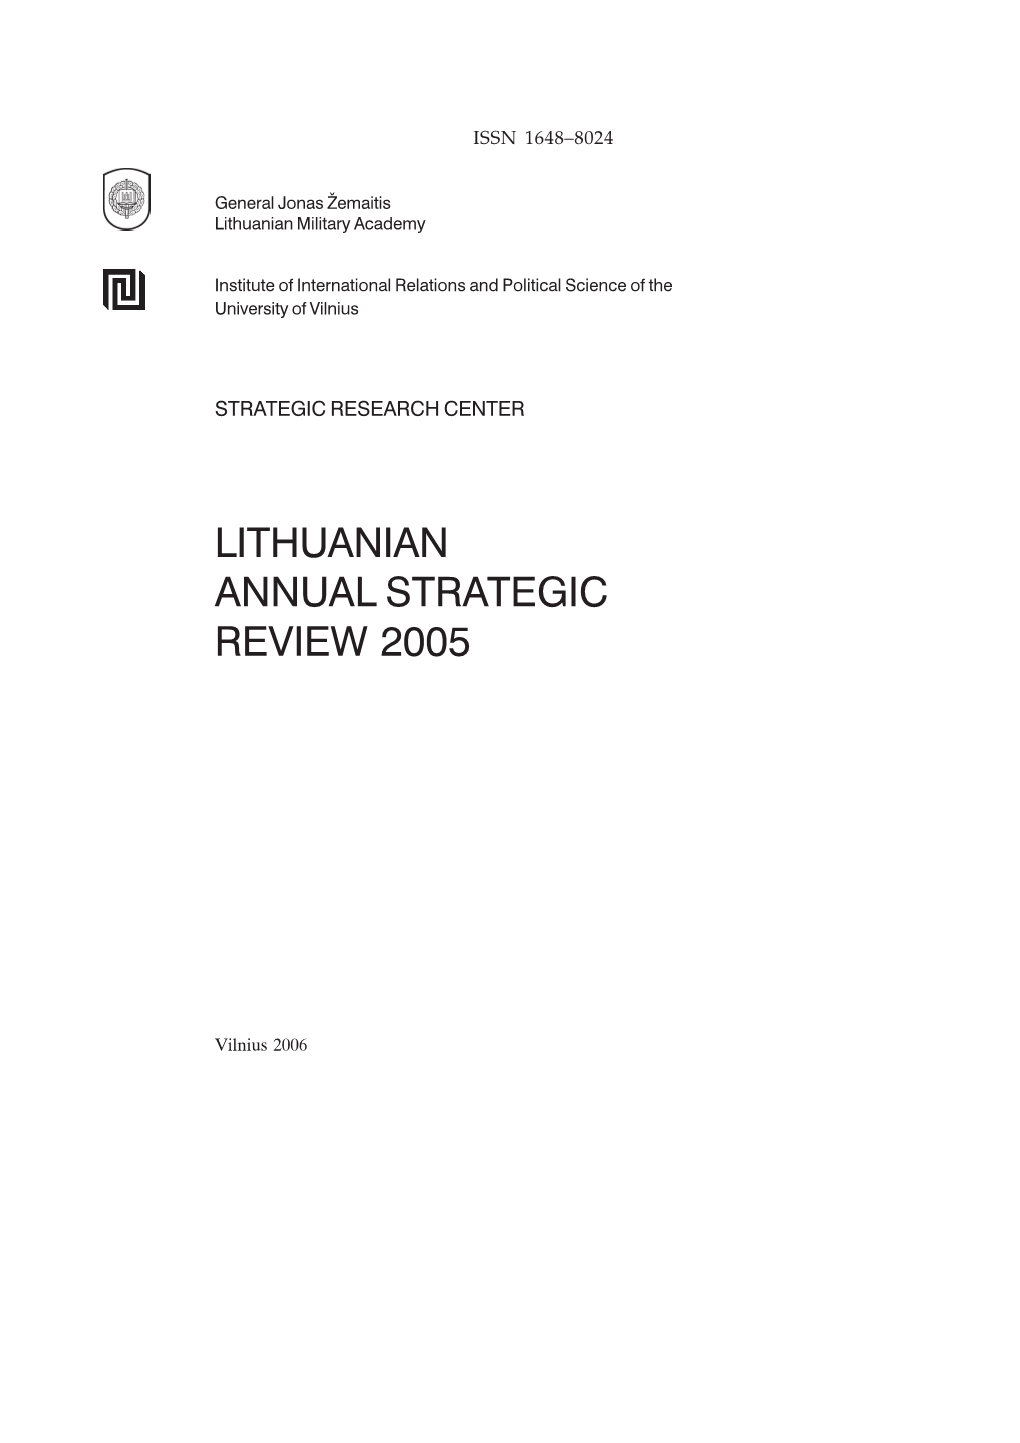 Lithuanian Annual Strategic Review 2005